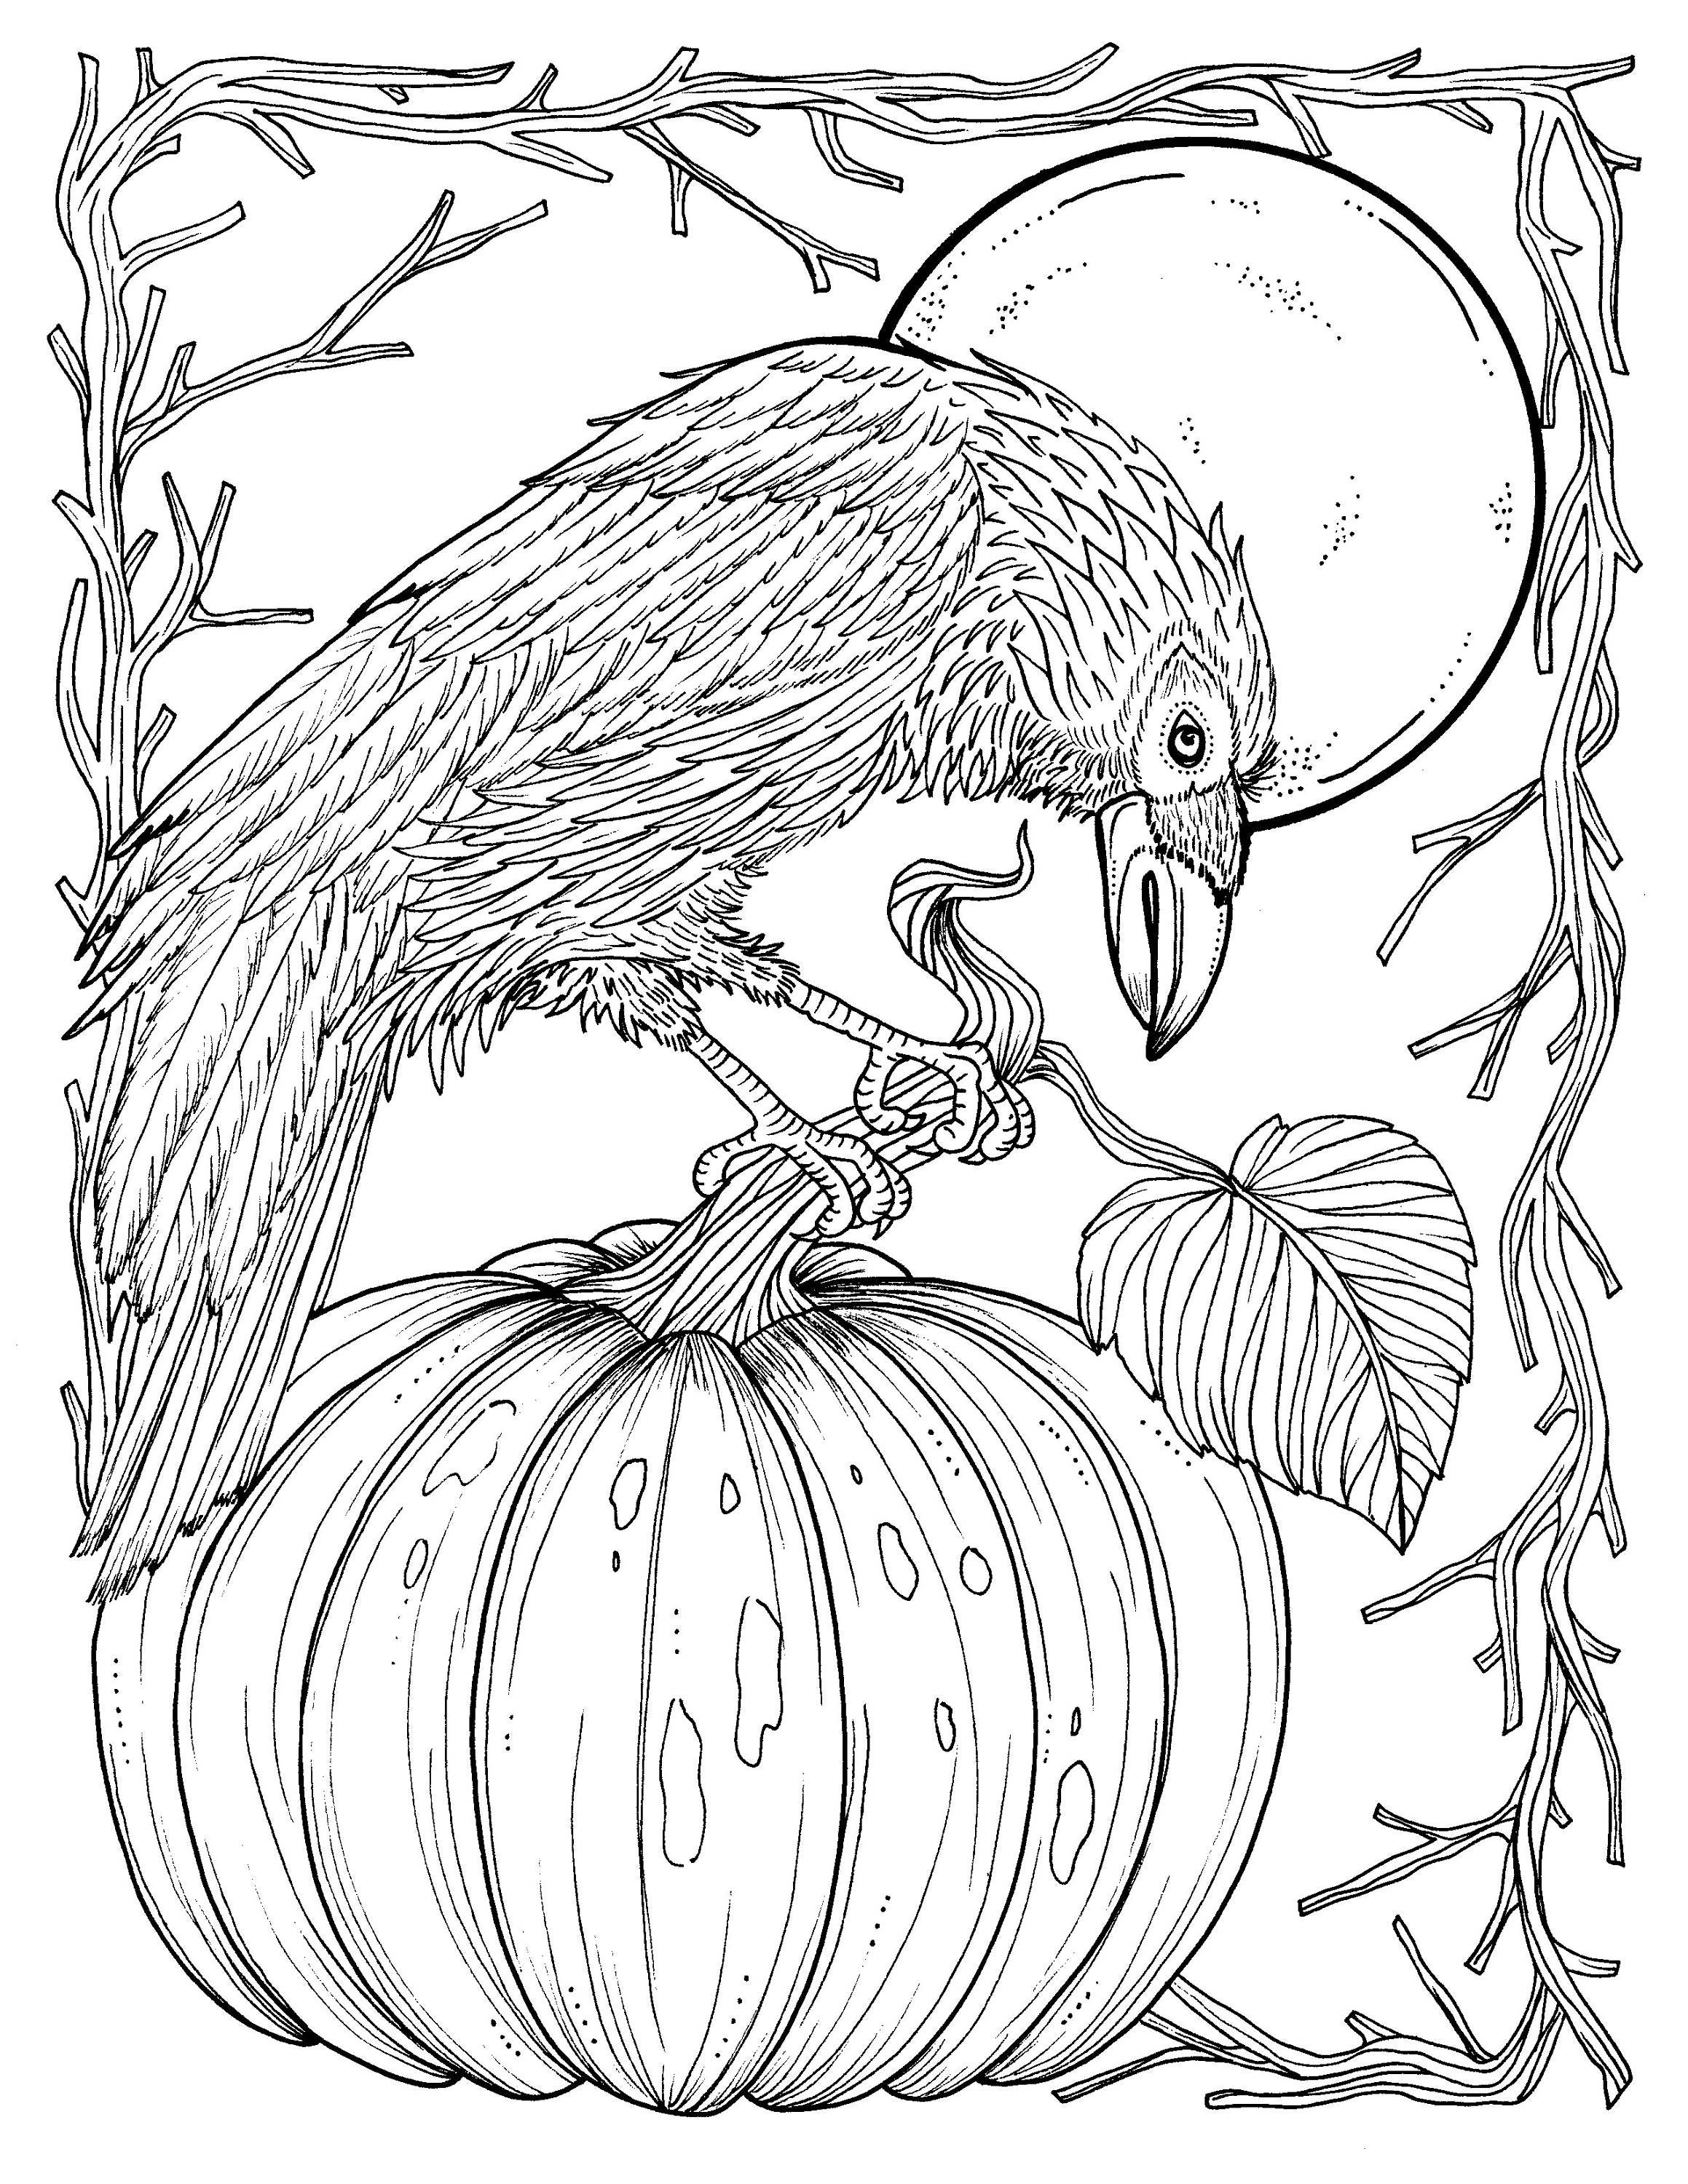 Fall Crow Digital Coloring Page ...